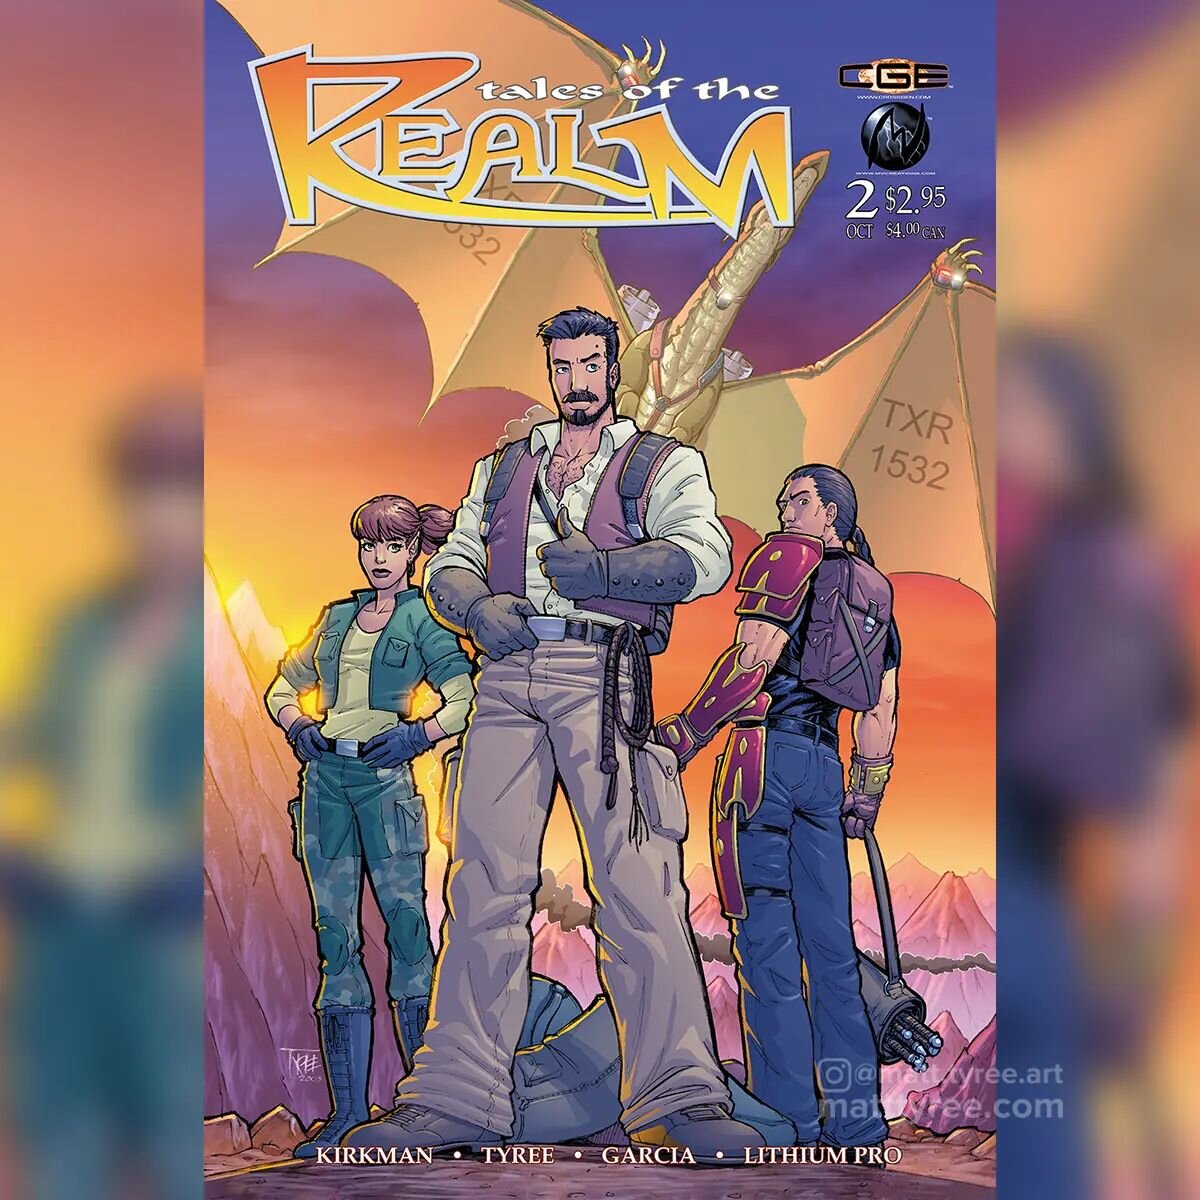 Tales of the Realm - Issue 2
A mini-series created by @jamesvalstaples and myself and written by 
@robkirkman @robertfkirkman #robertkirkman
Colors by Val Staples

#talesoftherealm #mvcreations #comics #comicart #artist #artistsoninstagram #illustrat